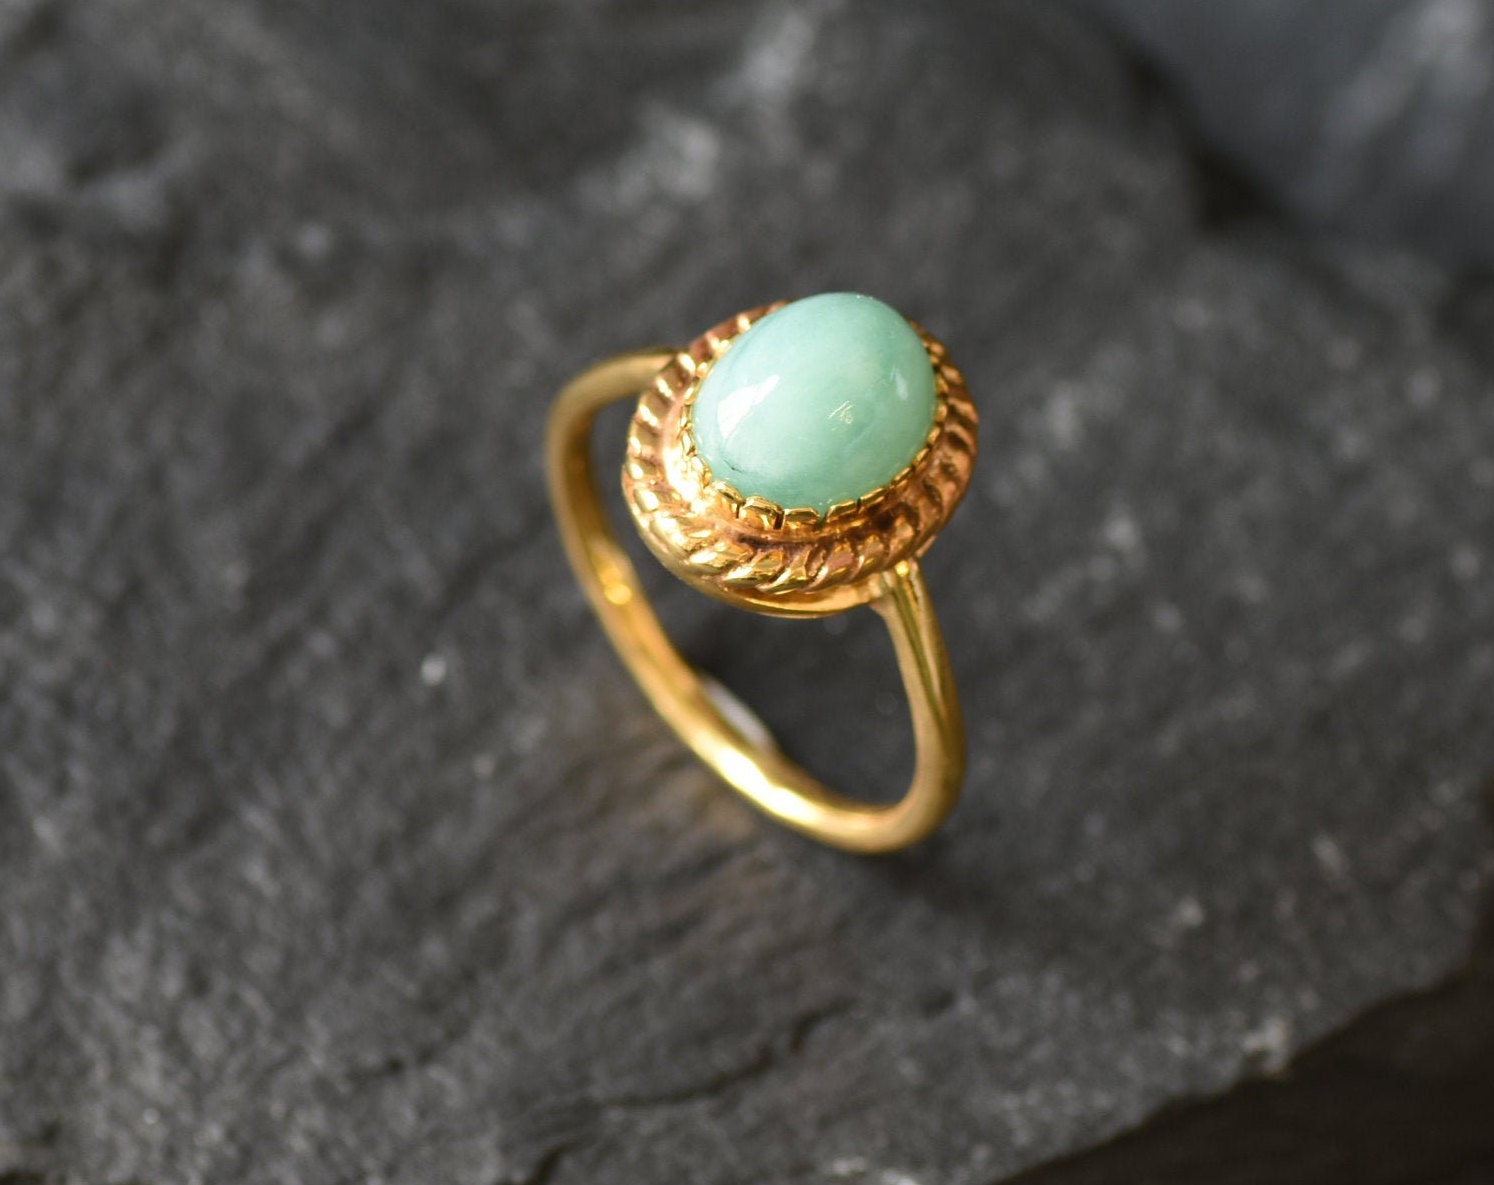 Gold Emerald Ring, Natural Emerald, May Birthstone, Gold Solitaire Ring, Gold Dainty Ring, Real Emerald Ring, Genuine Emerald, Vermeil Ring